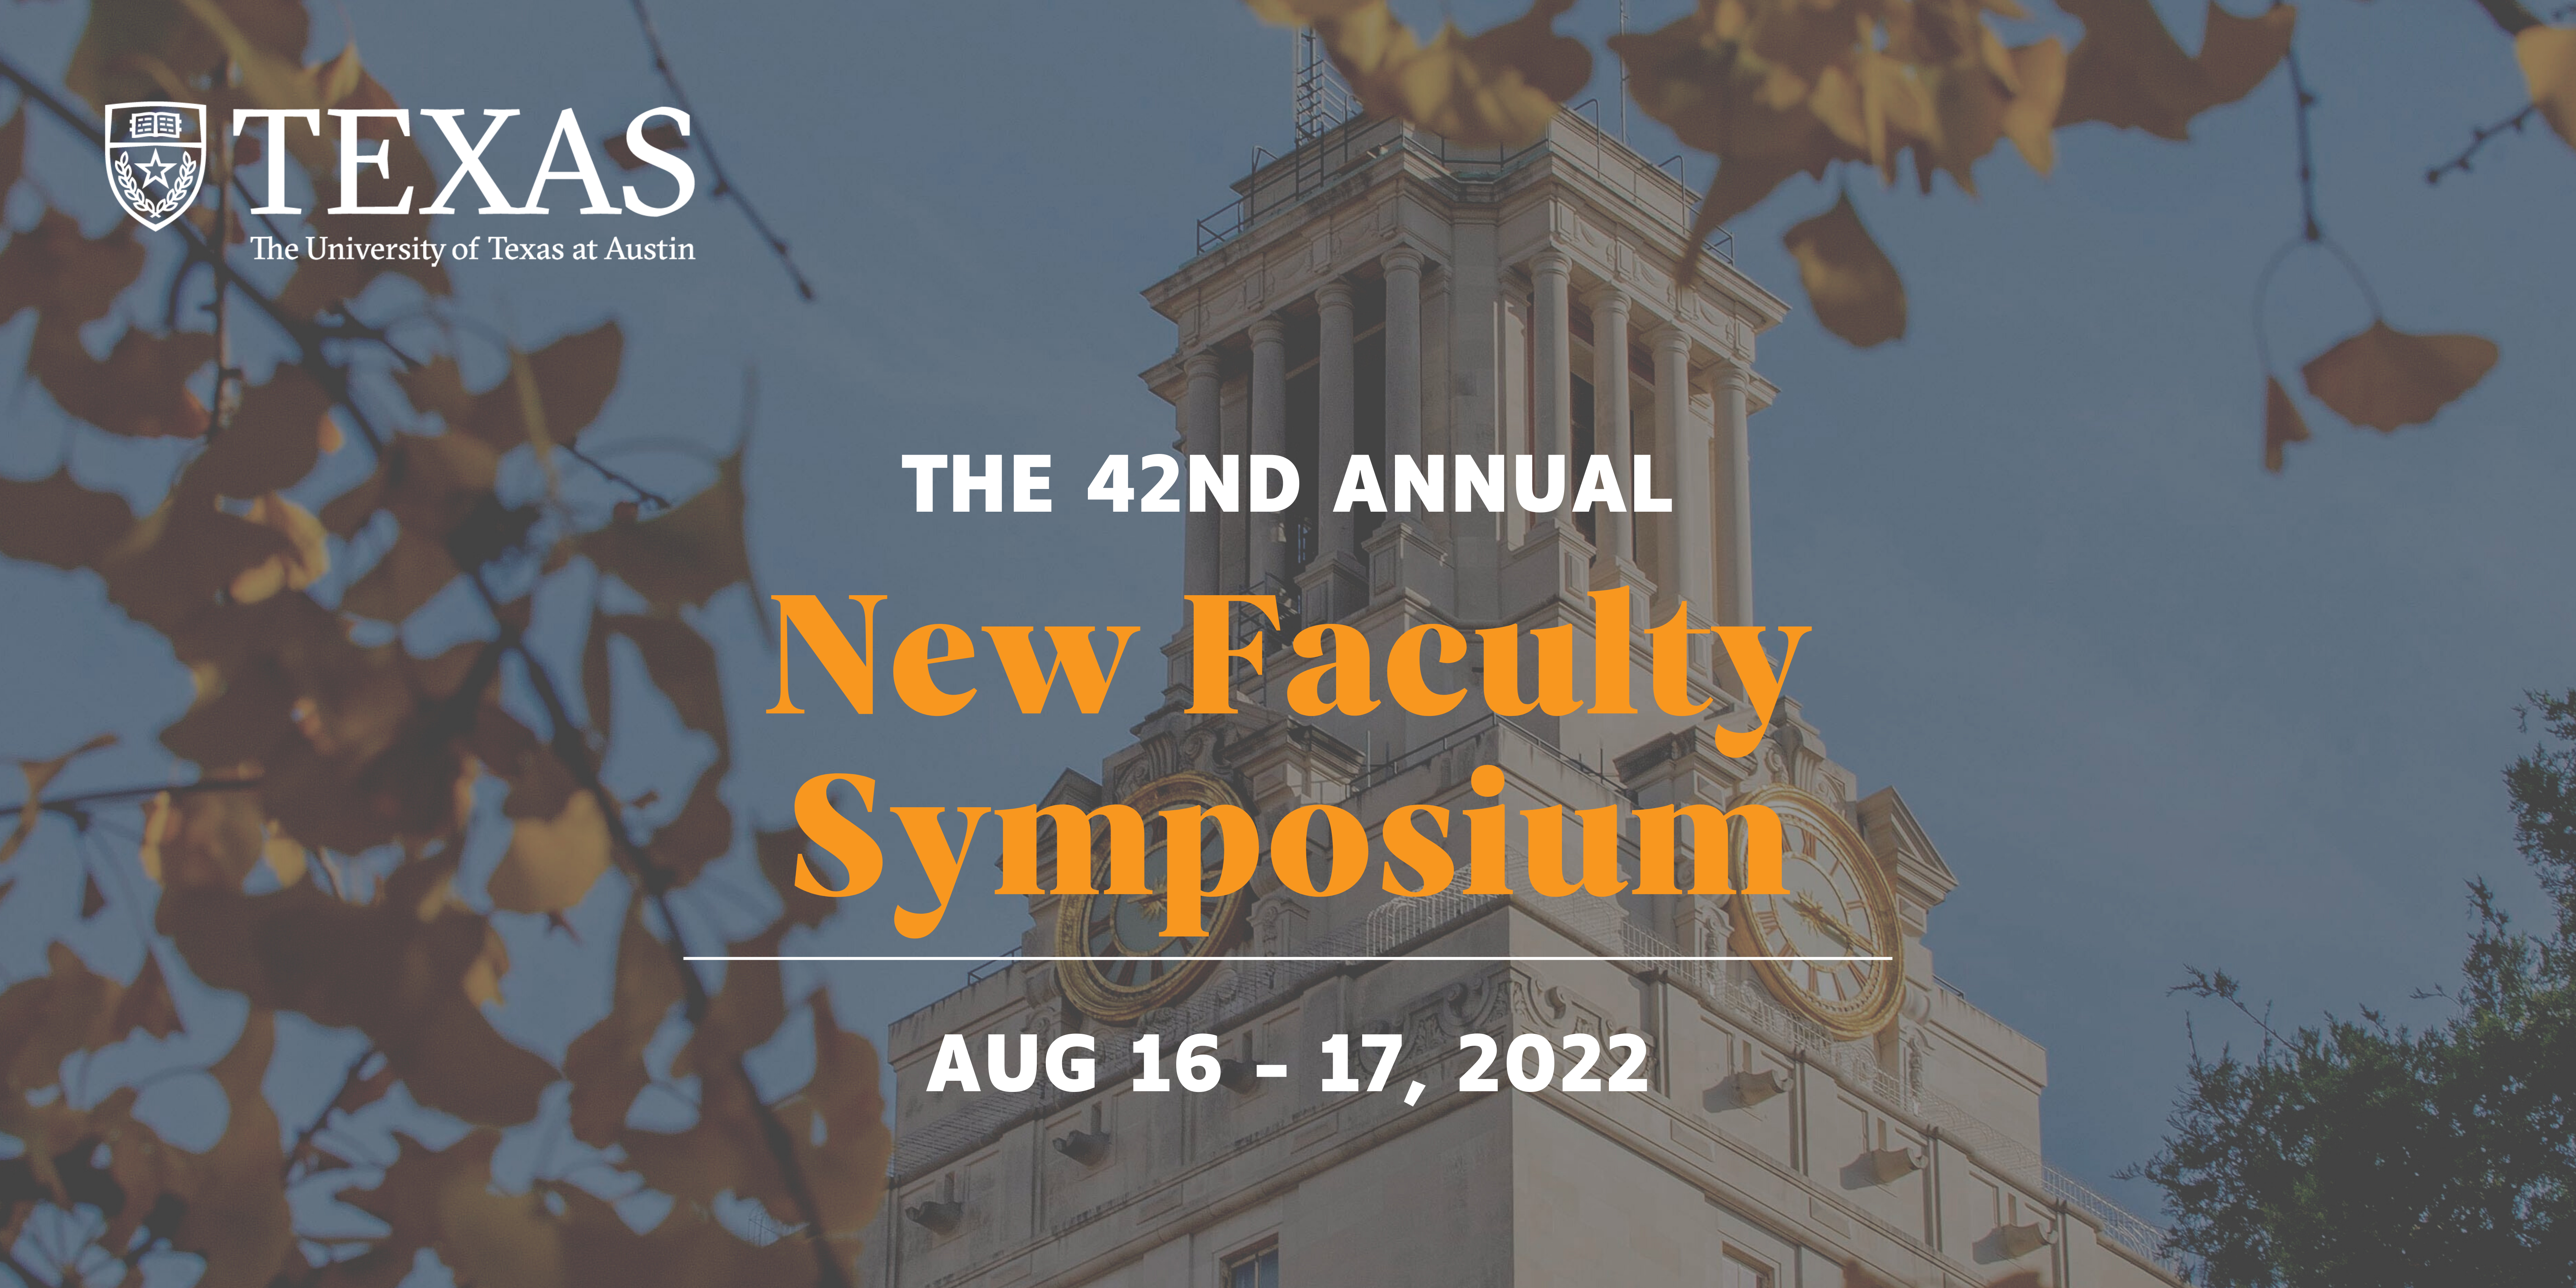 Image of the UT Tower with the following text: "The 42nd Annual New Faculty Symposium, August 16-17, 2022"